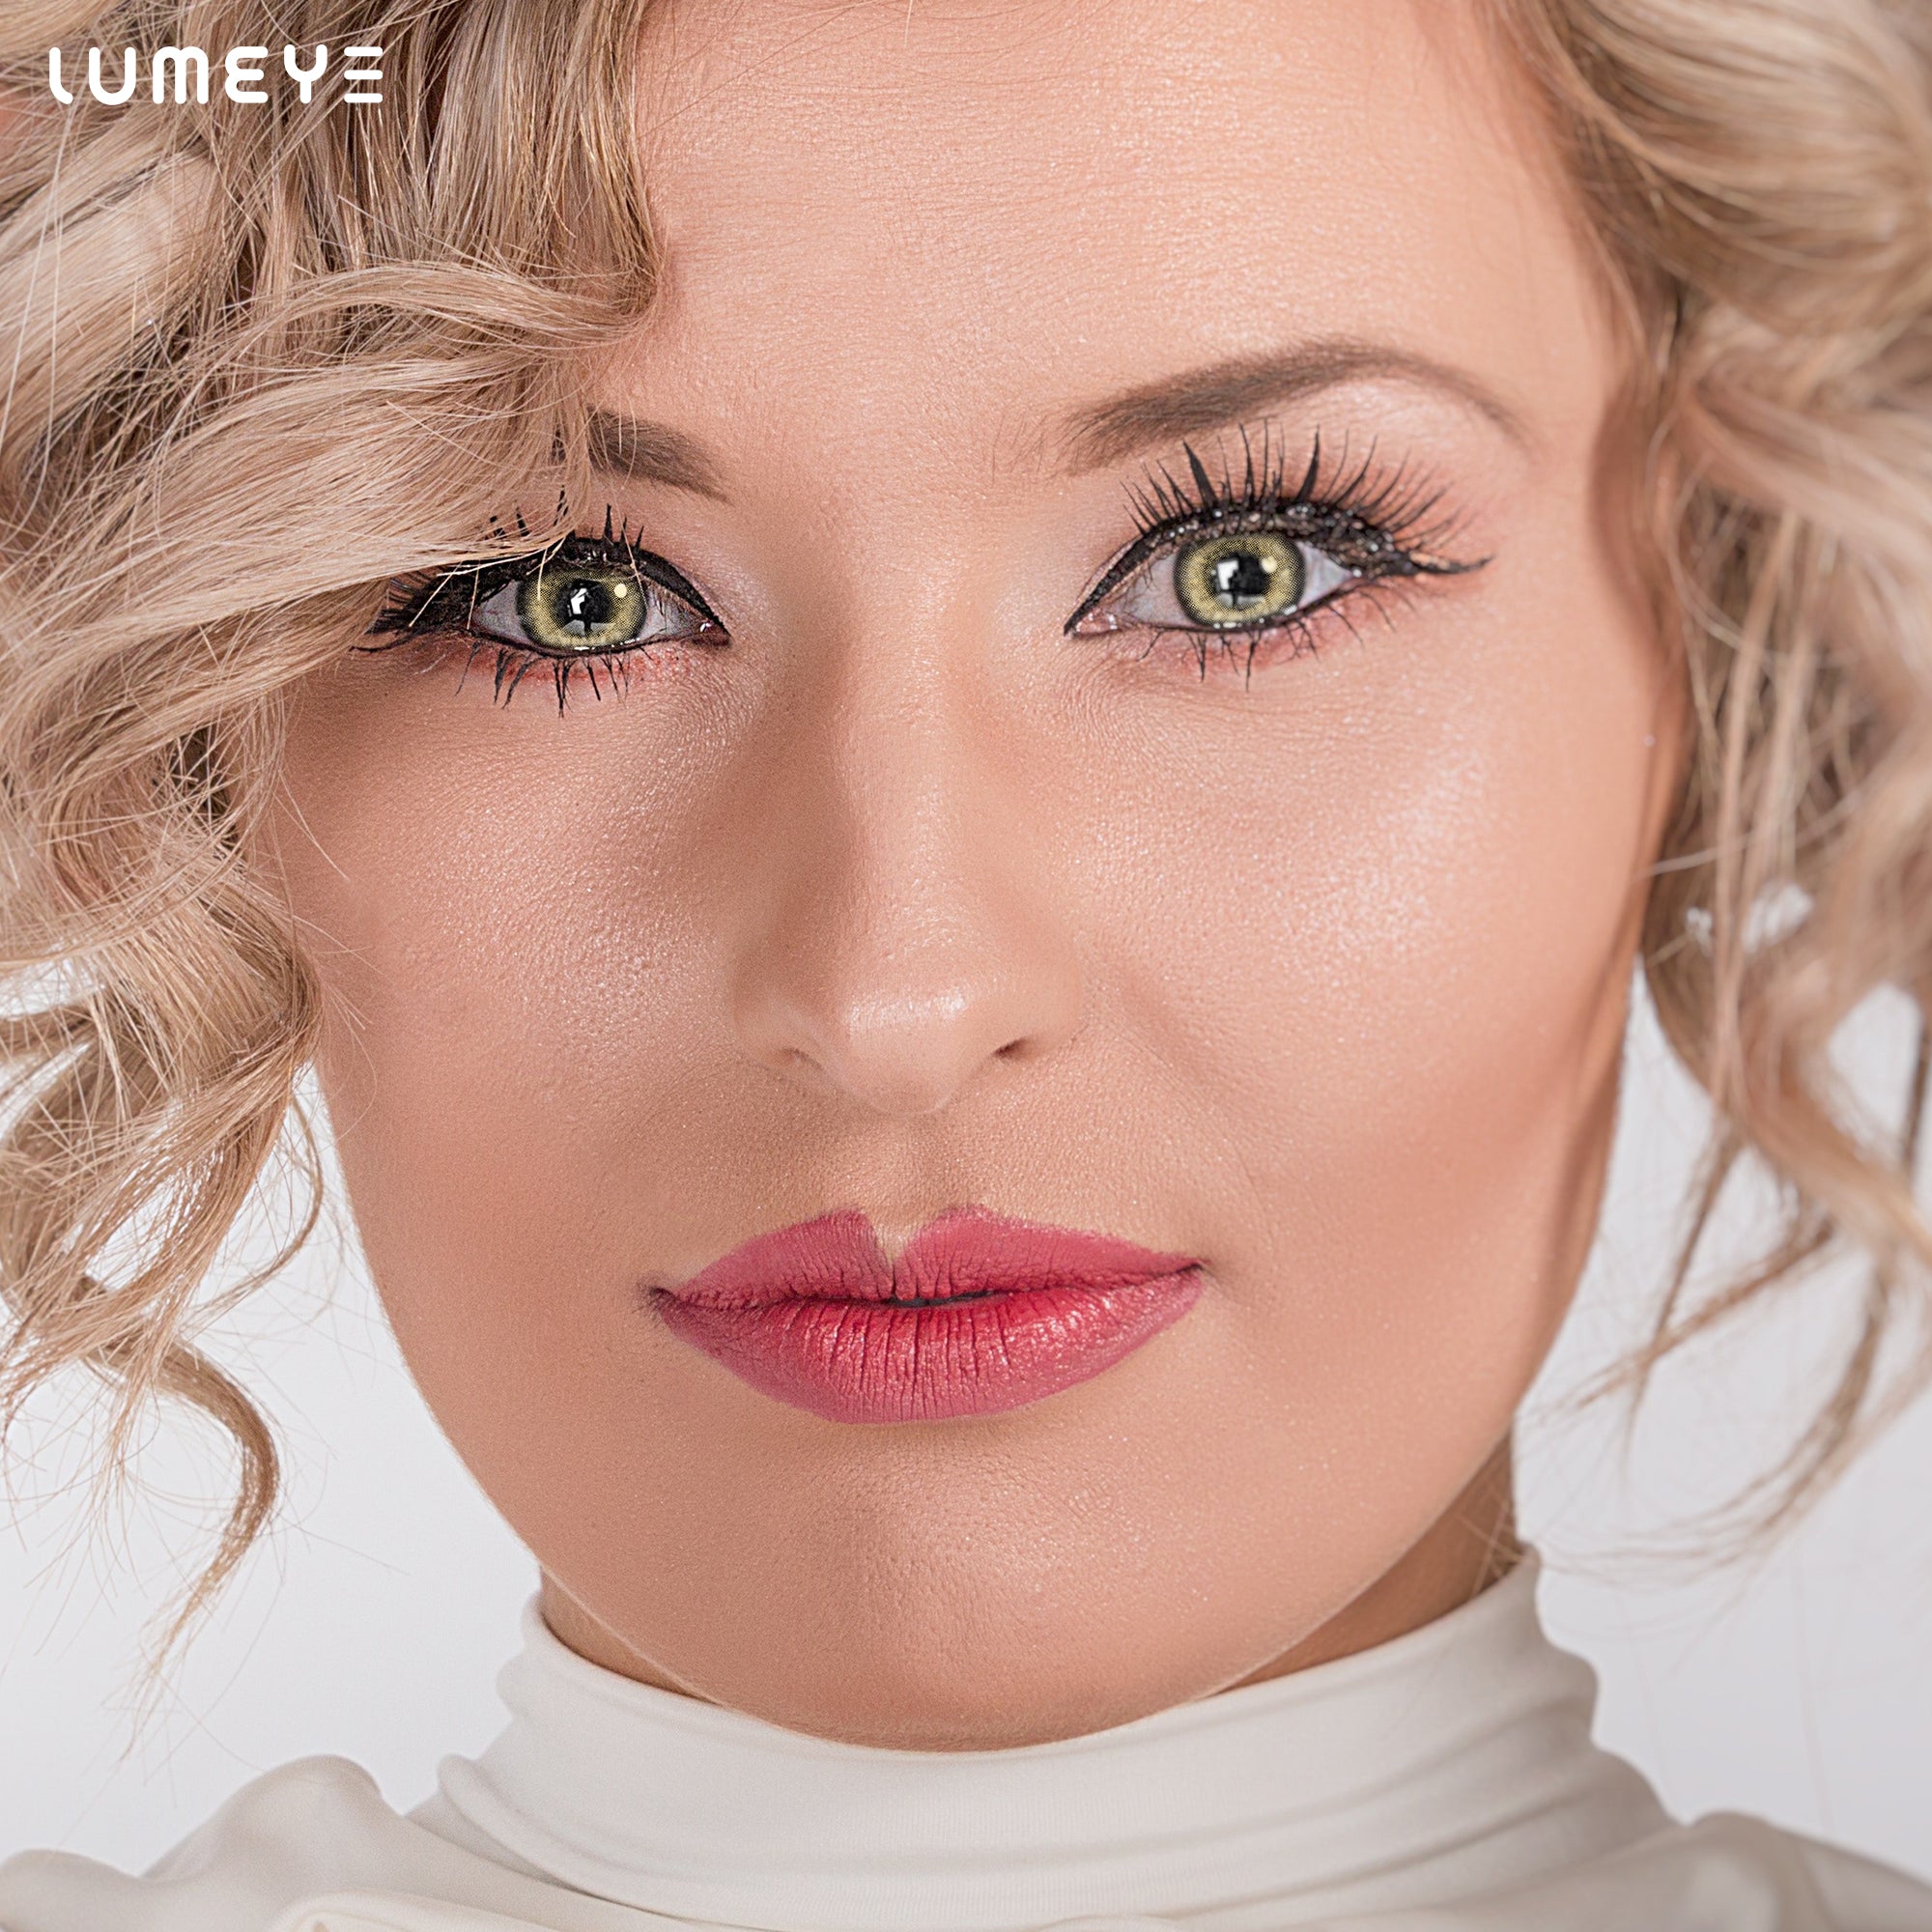 Best COLORED CONTACTS - LUMEYE Chubby Brown Colored Contact Lenses - LUMEYE